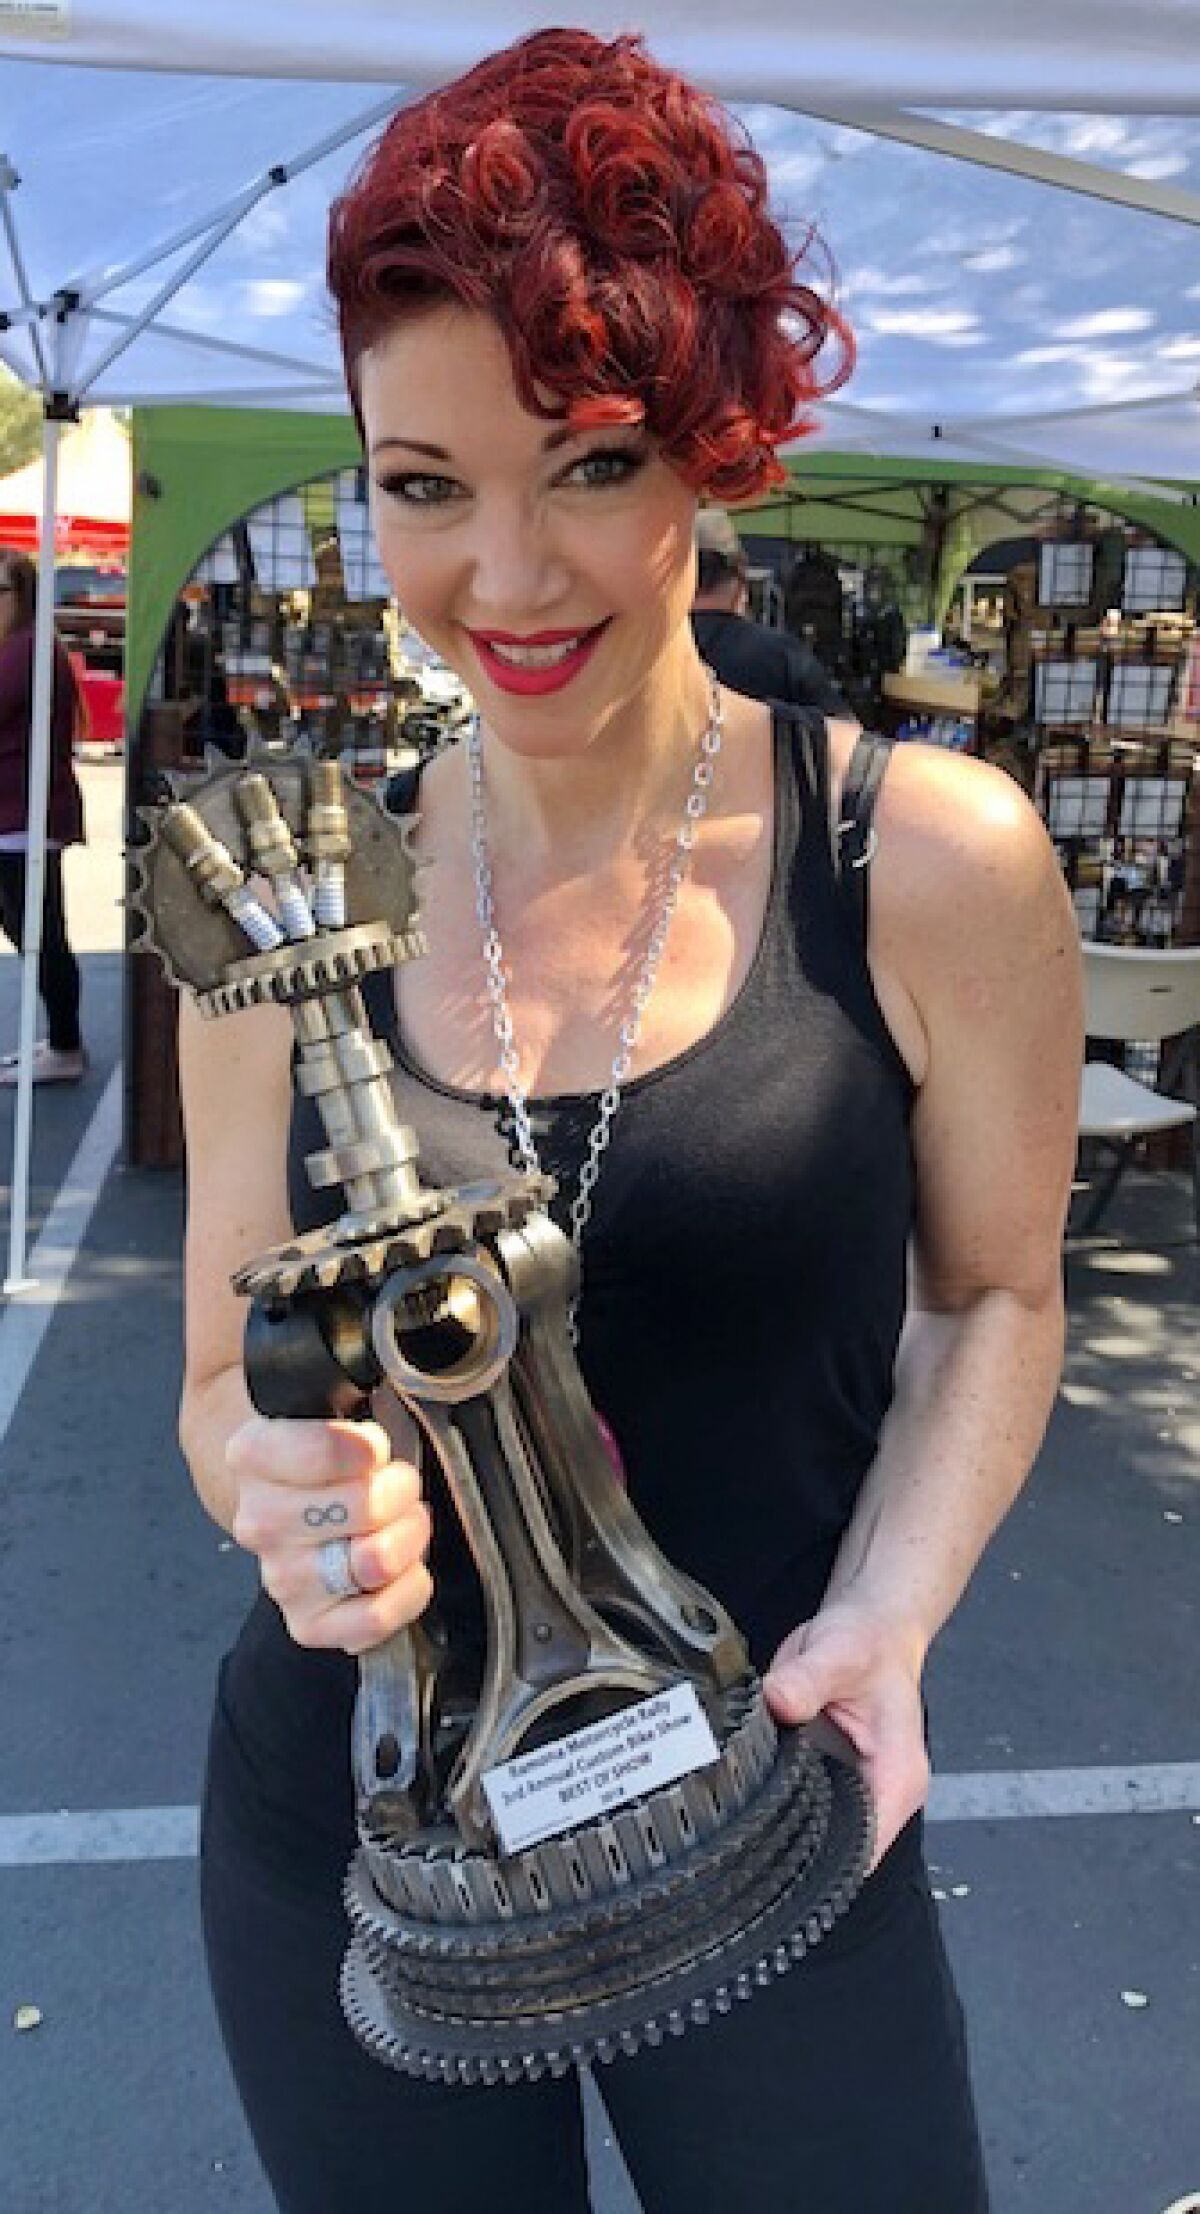 Aubrey Leigh presented trophies to Custom Motorcycle Show winners at the 2018 Ramona Motorcycle Rally.